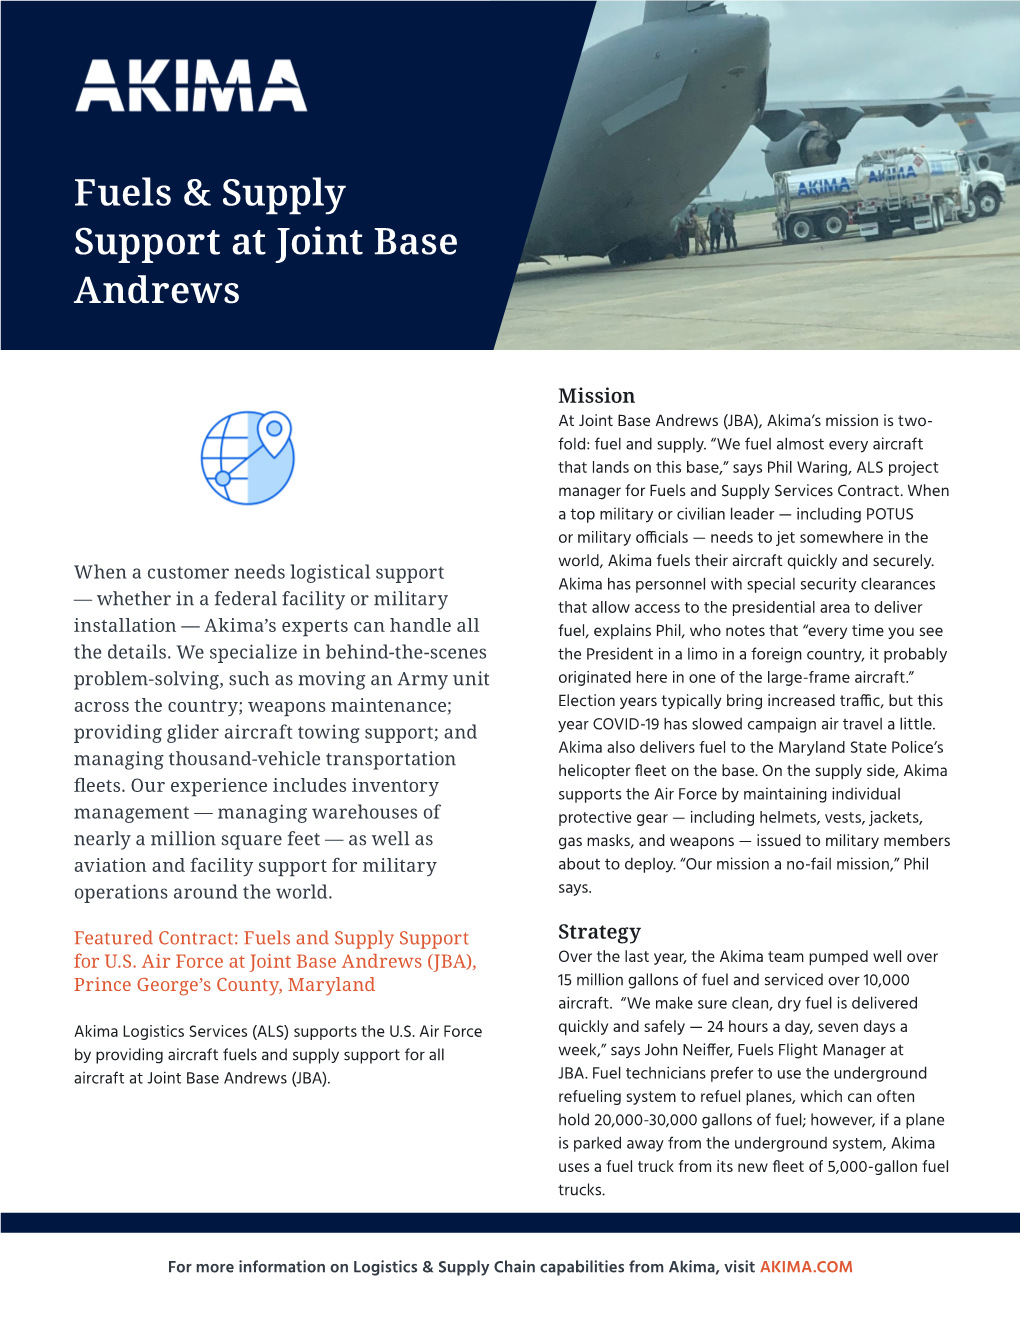 Fuels & Supply Support at Joint Base Andrews